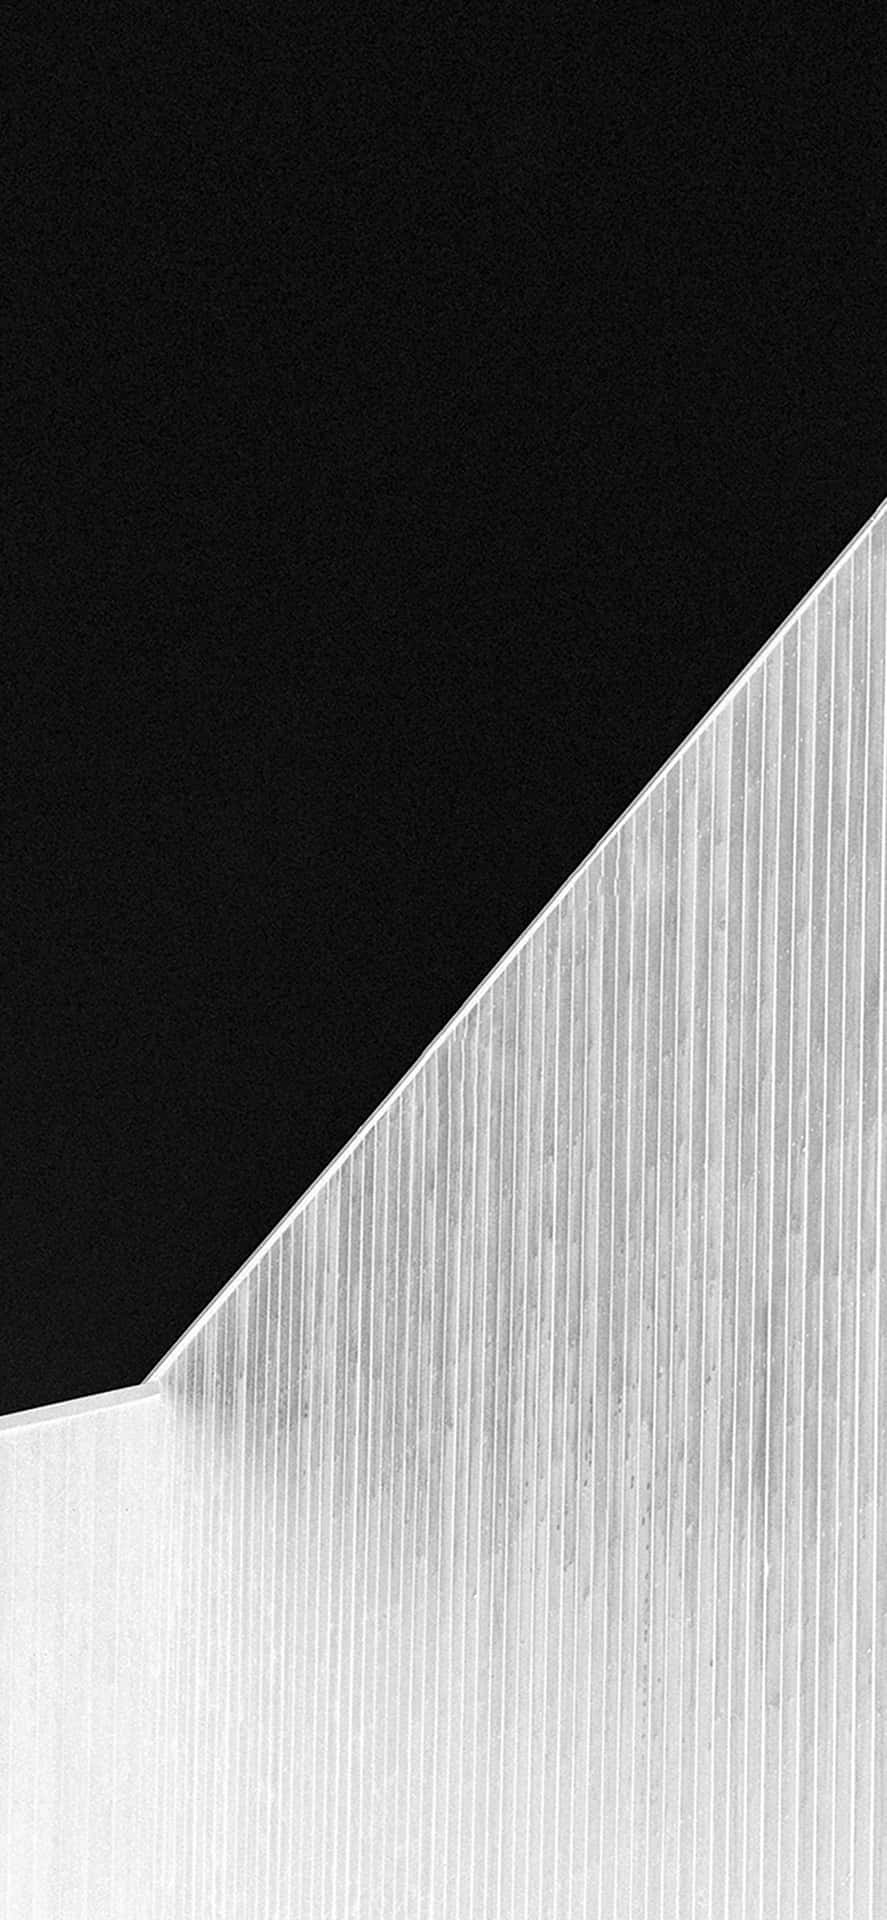 A Black And White Photo Of A Building Wallpaper